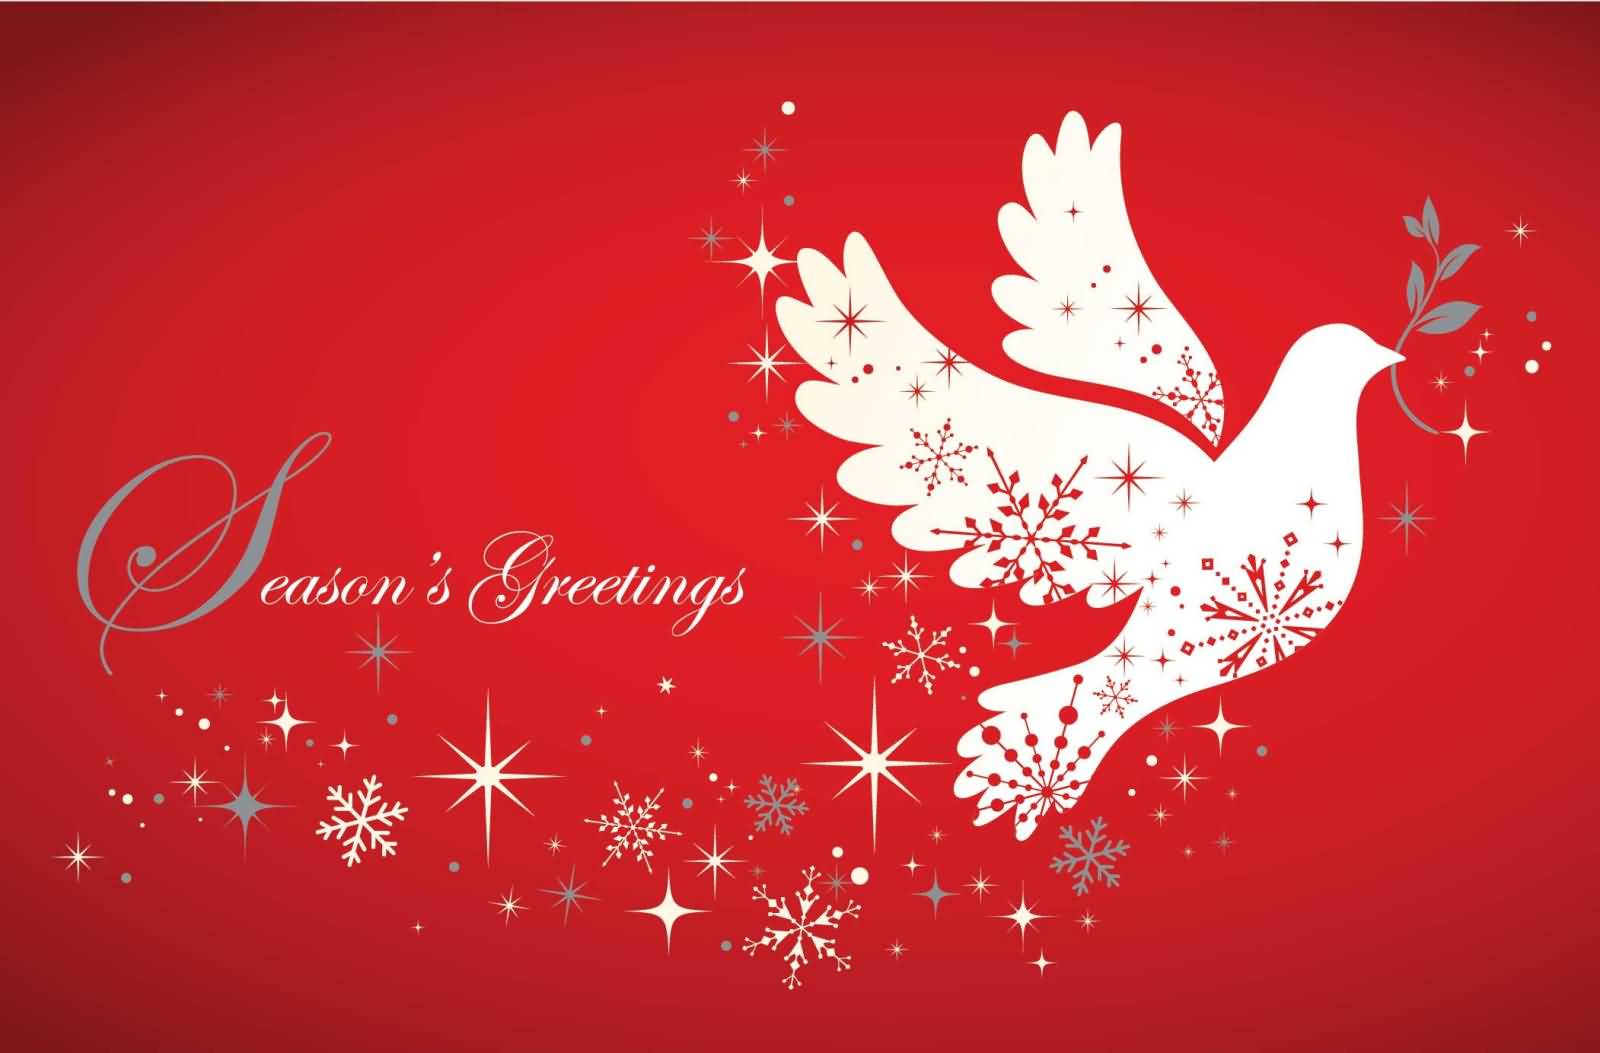 Season's Greetings Flying Dove Picture